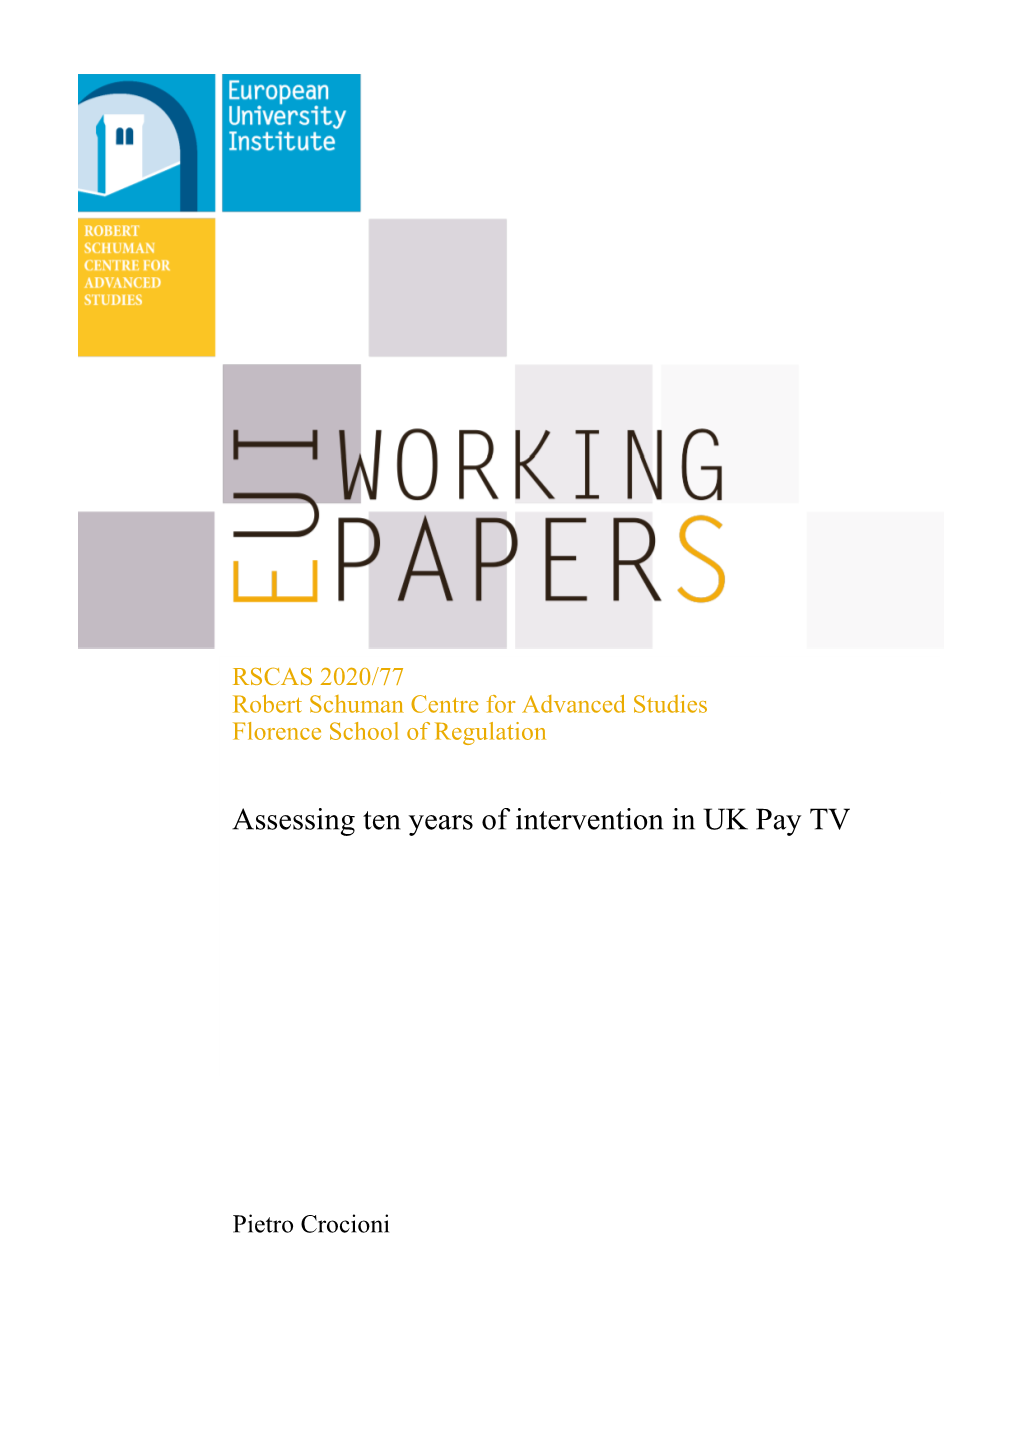 EUI RSCAS Working Paper 2020/77 Assessing Ten Years of Intervention in UK Pay TV